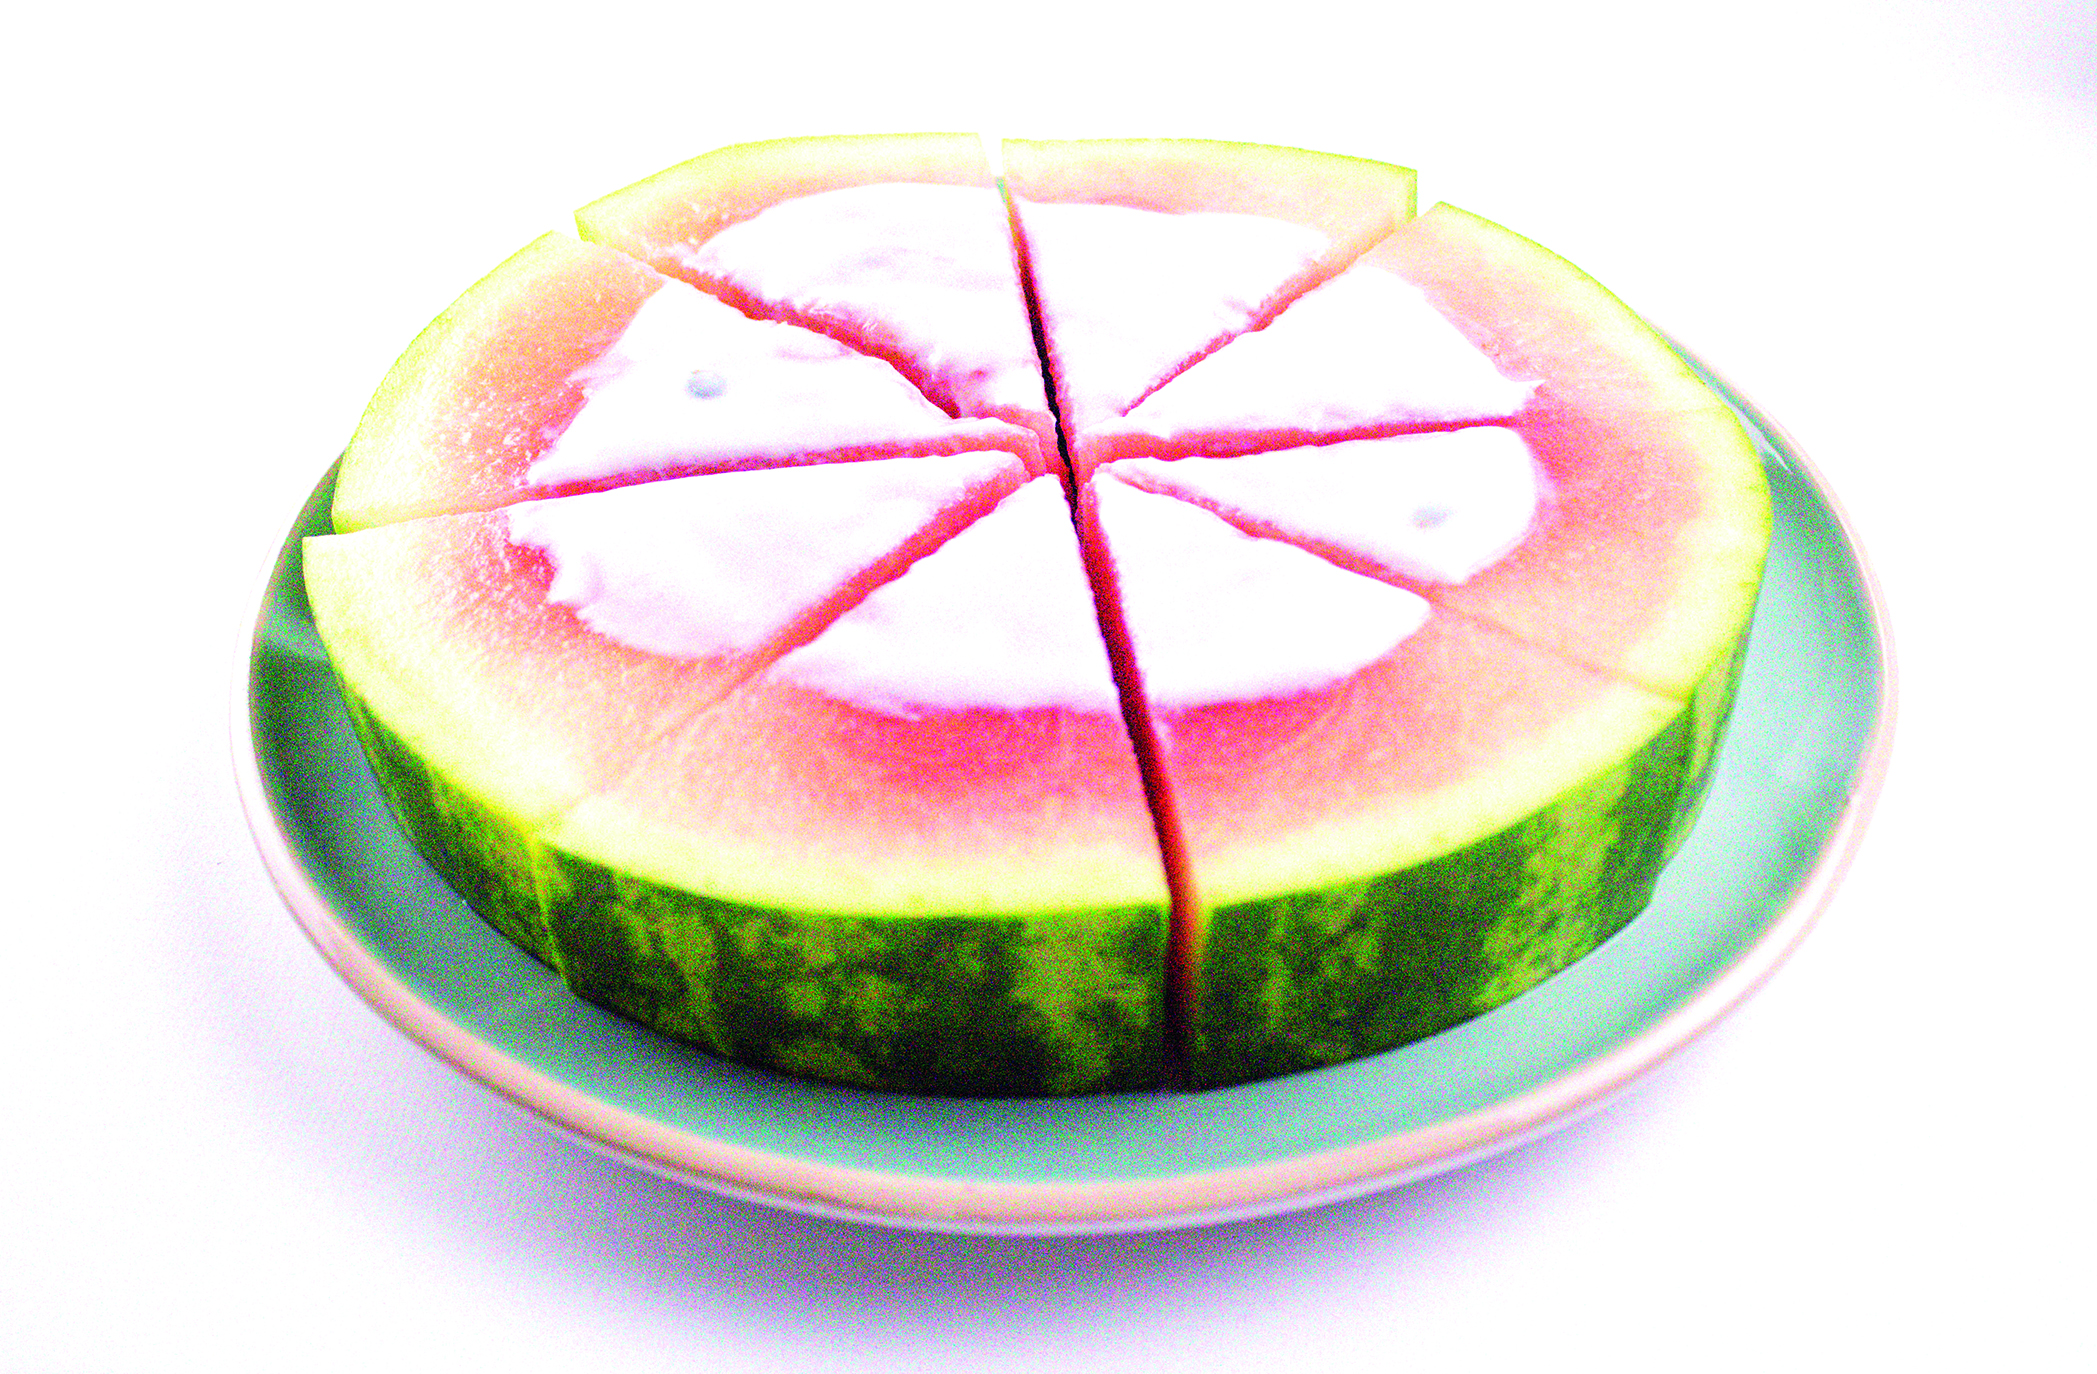 Watermelon and yoghurt cut in pieces